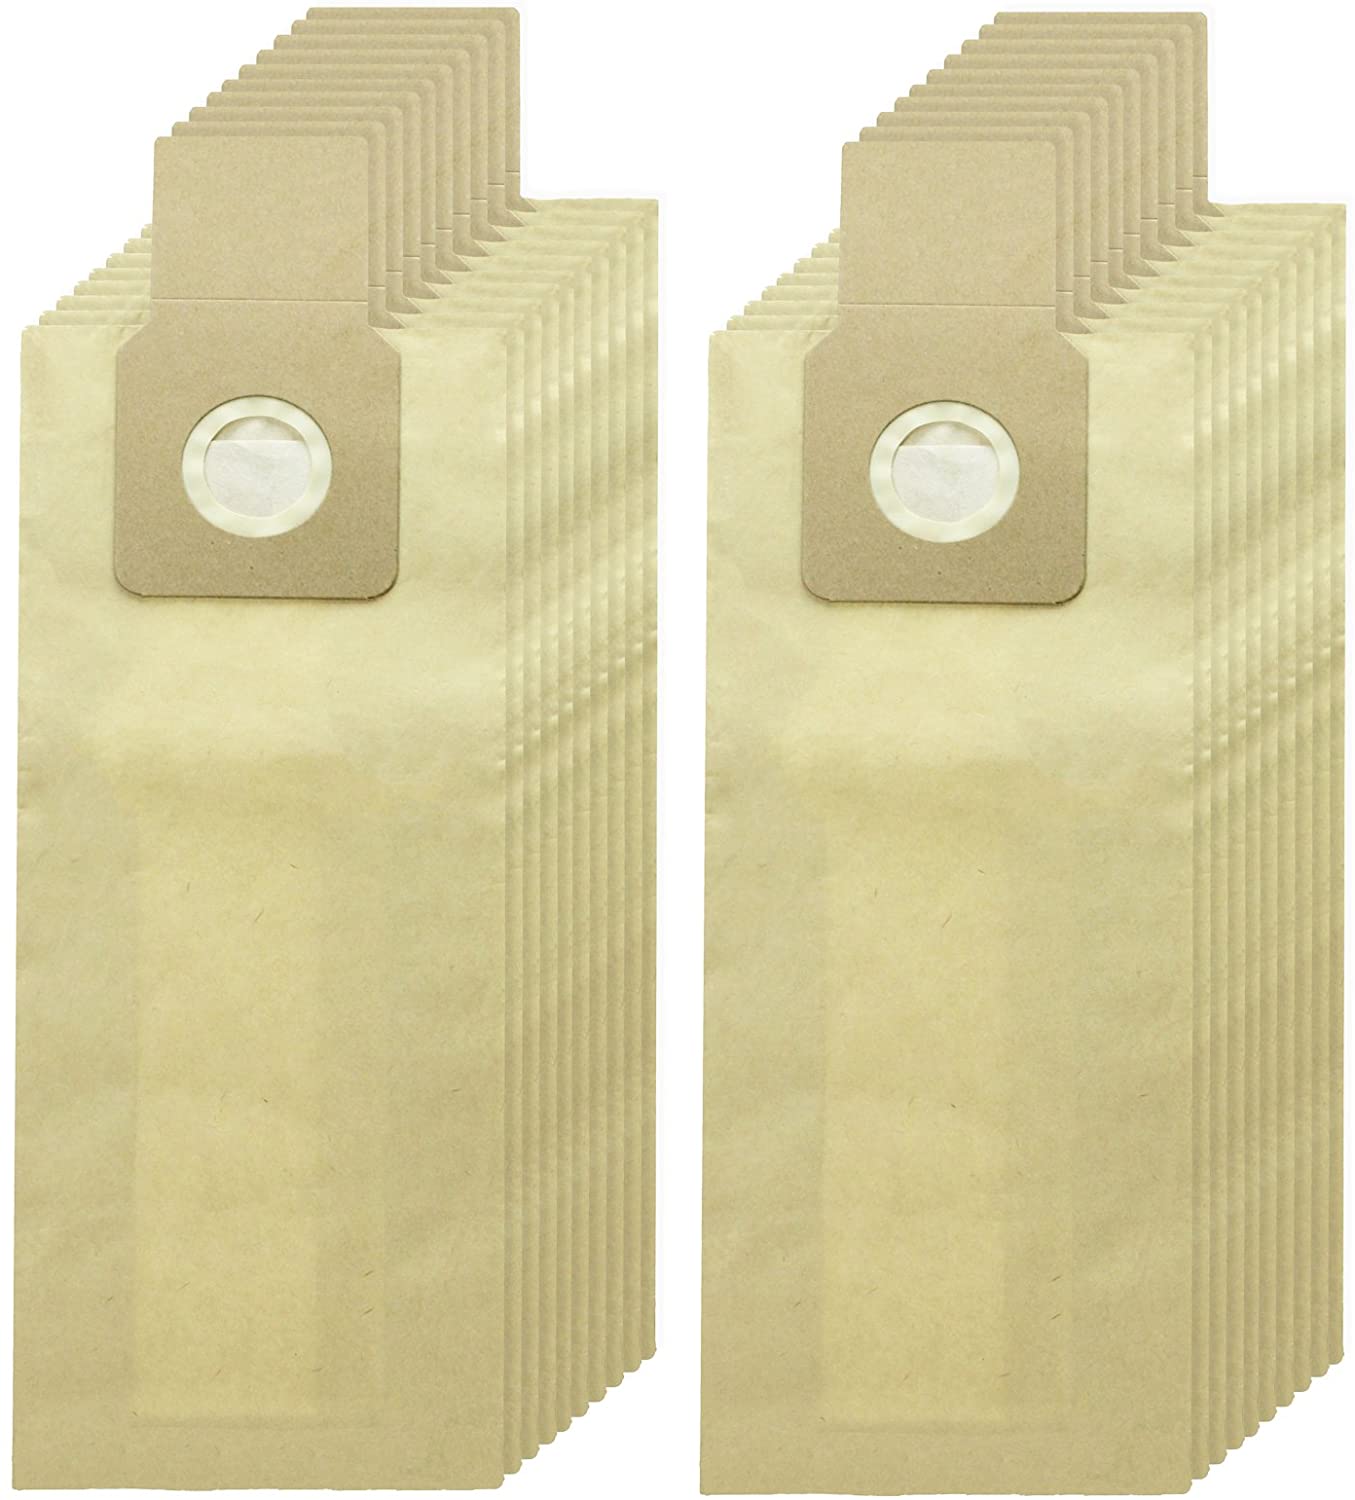 Strong Double Walled Dust Bags for Electrolux Vacuum Cleaners (Pack of 20)